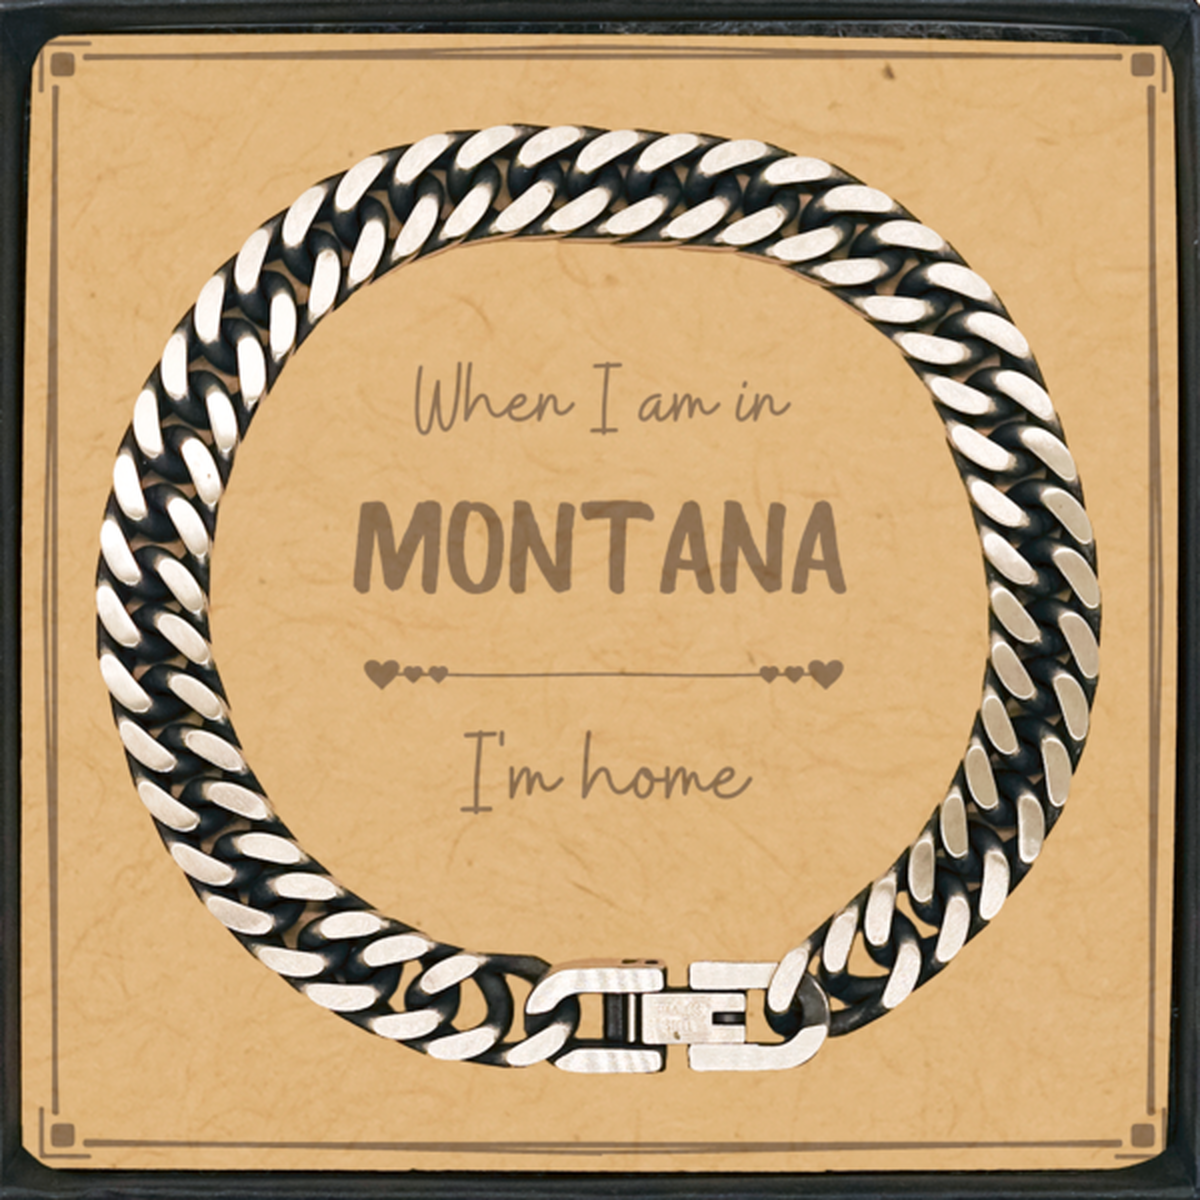 When I am in Montana I'm home Cuban Link Chain Bracelet, Message Card Gifts For Montana, State Montana Birthday Gifts for Friends Coworker